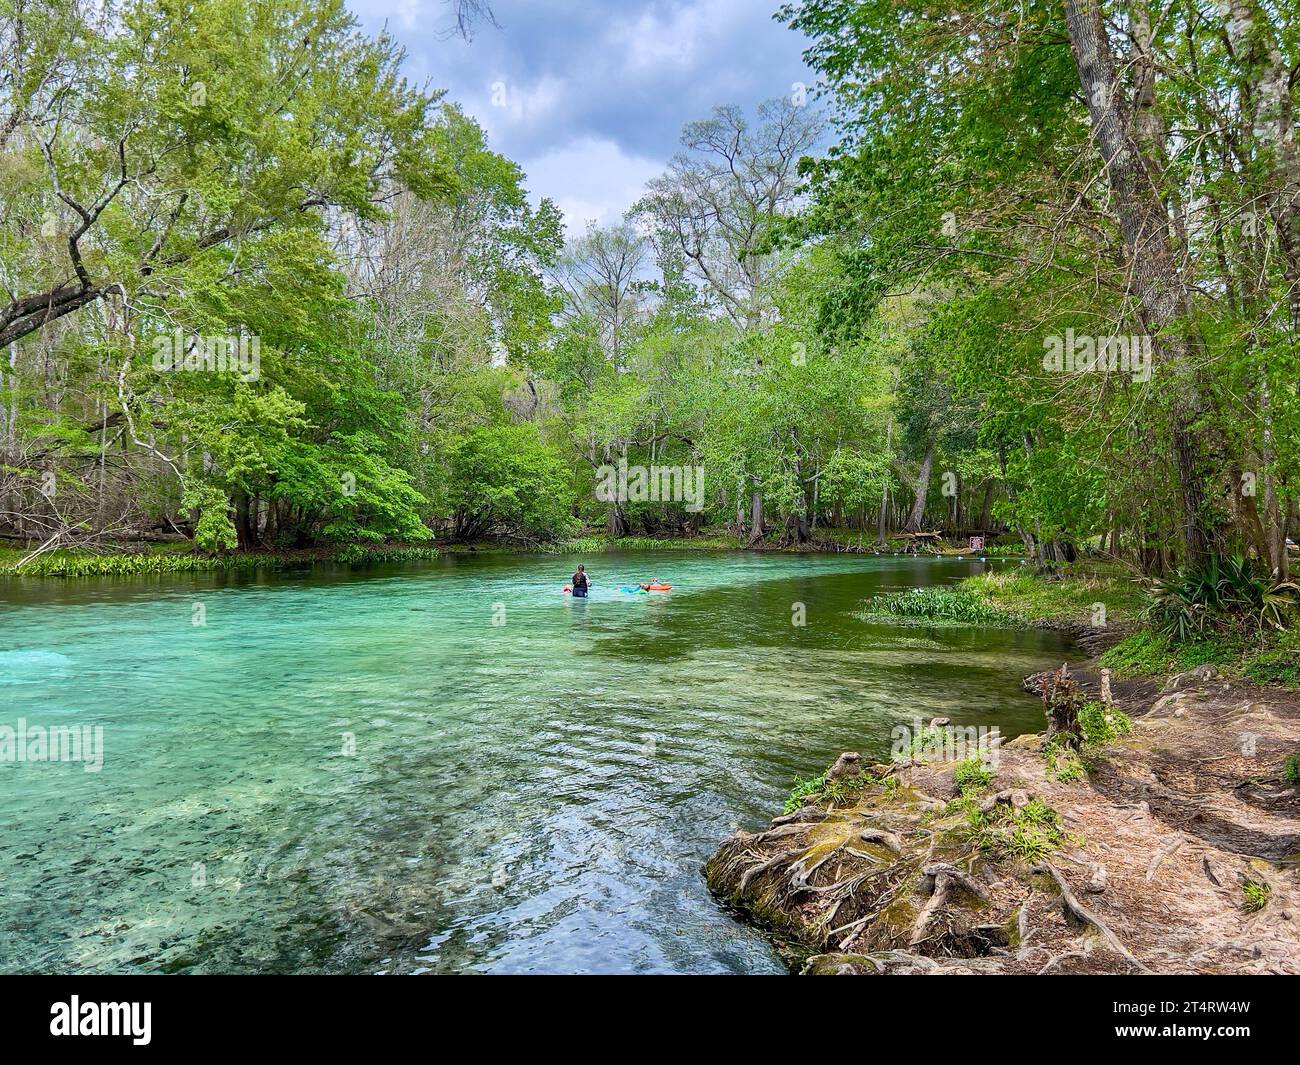 Fort White, FL USA - March 2, 2023:  People swimming in the clear blue water of Gilcrist Blue Springs near Fort White, Florida on a beautiful sunny da Stock Photo